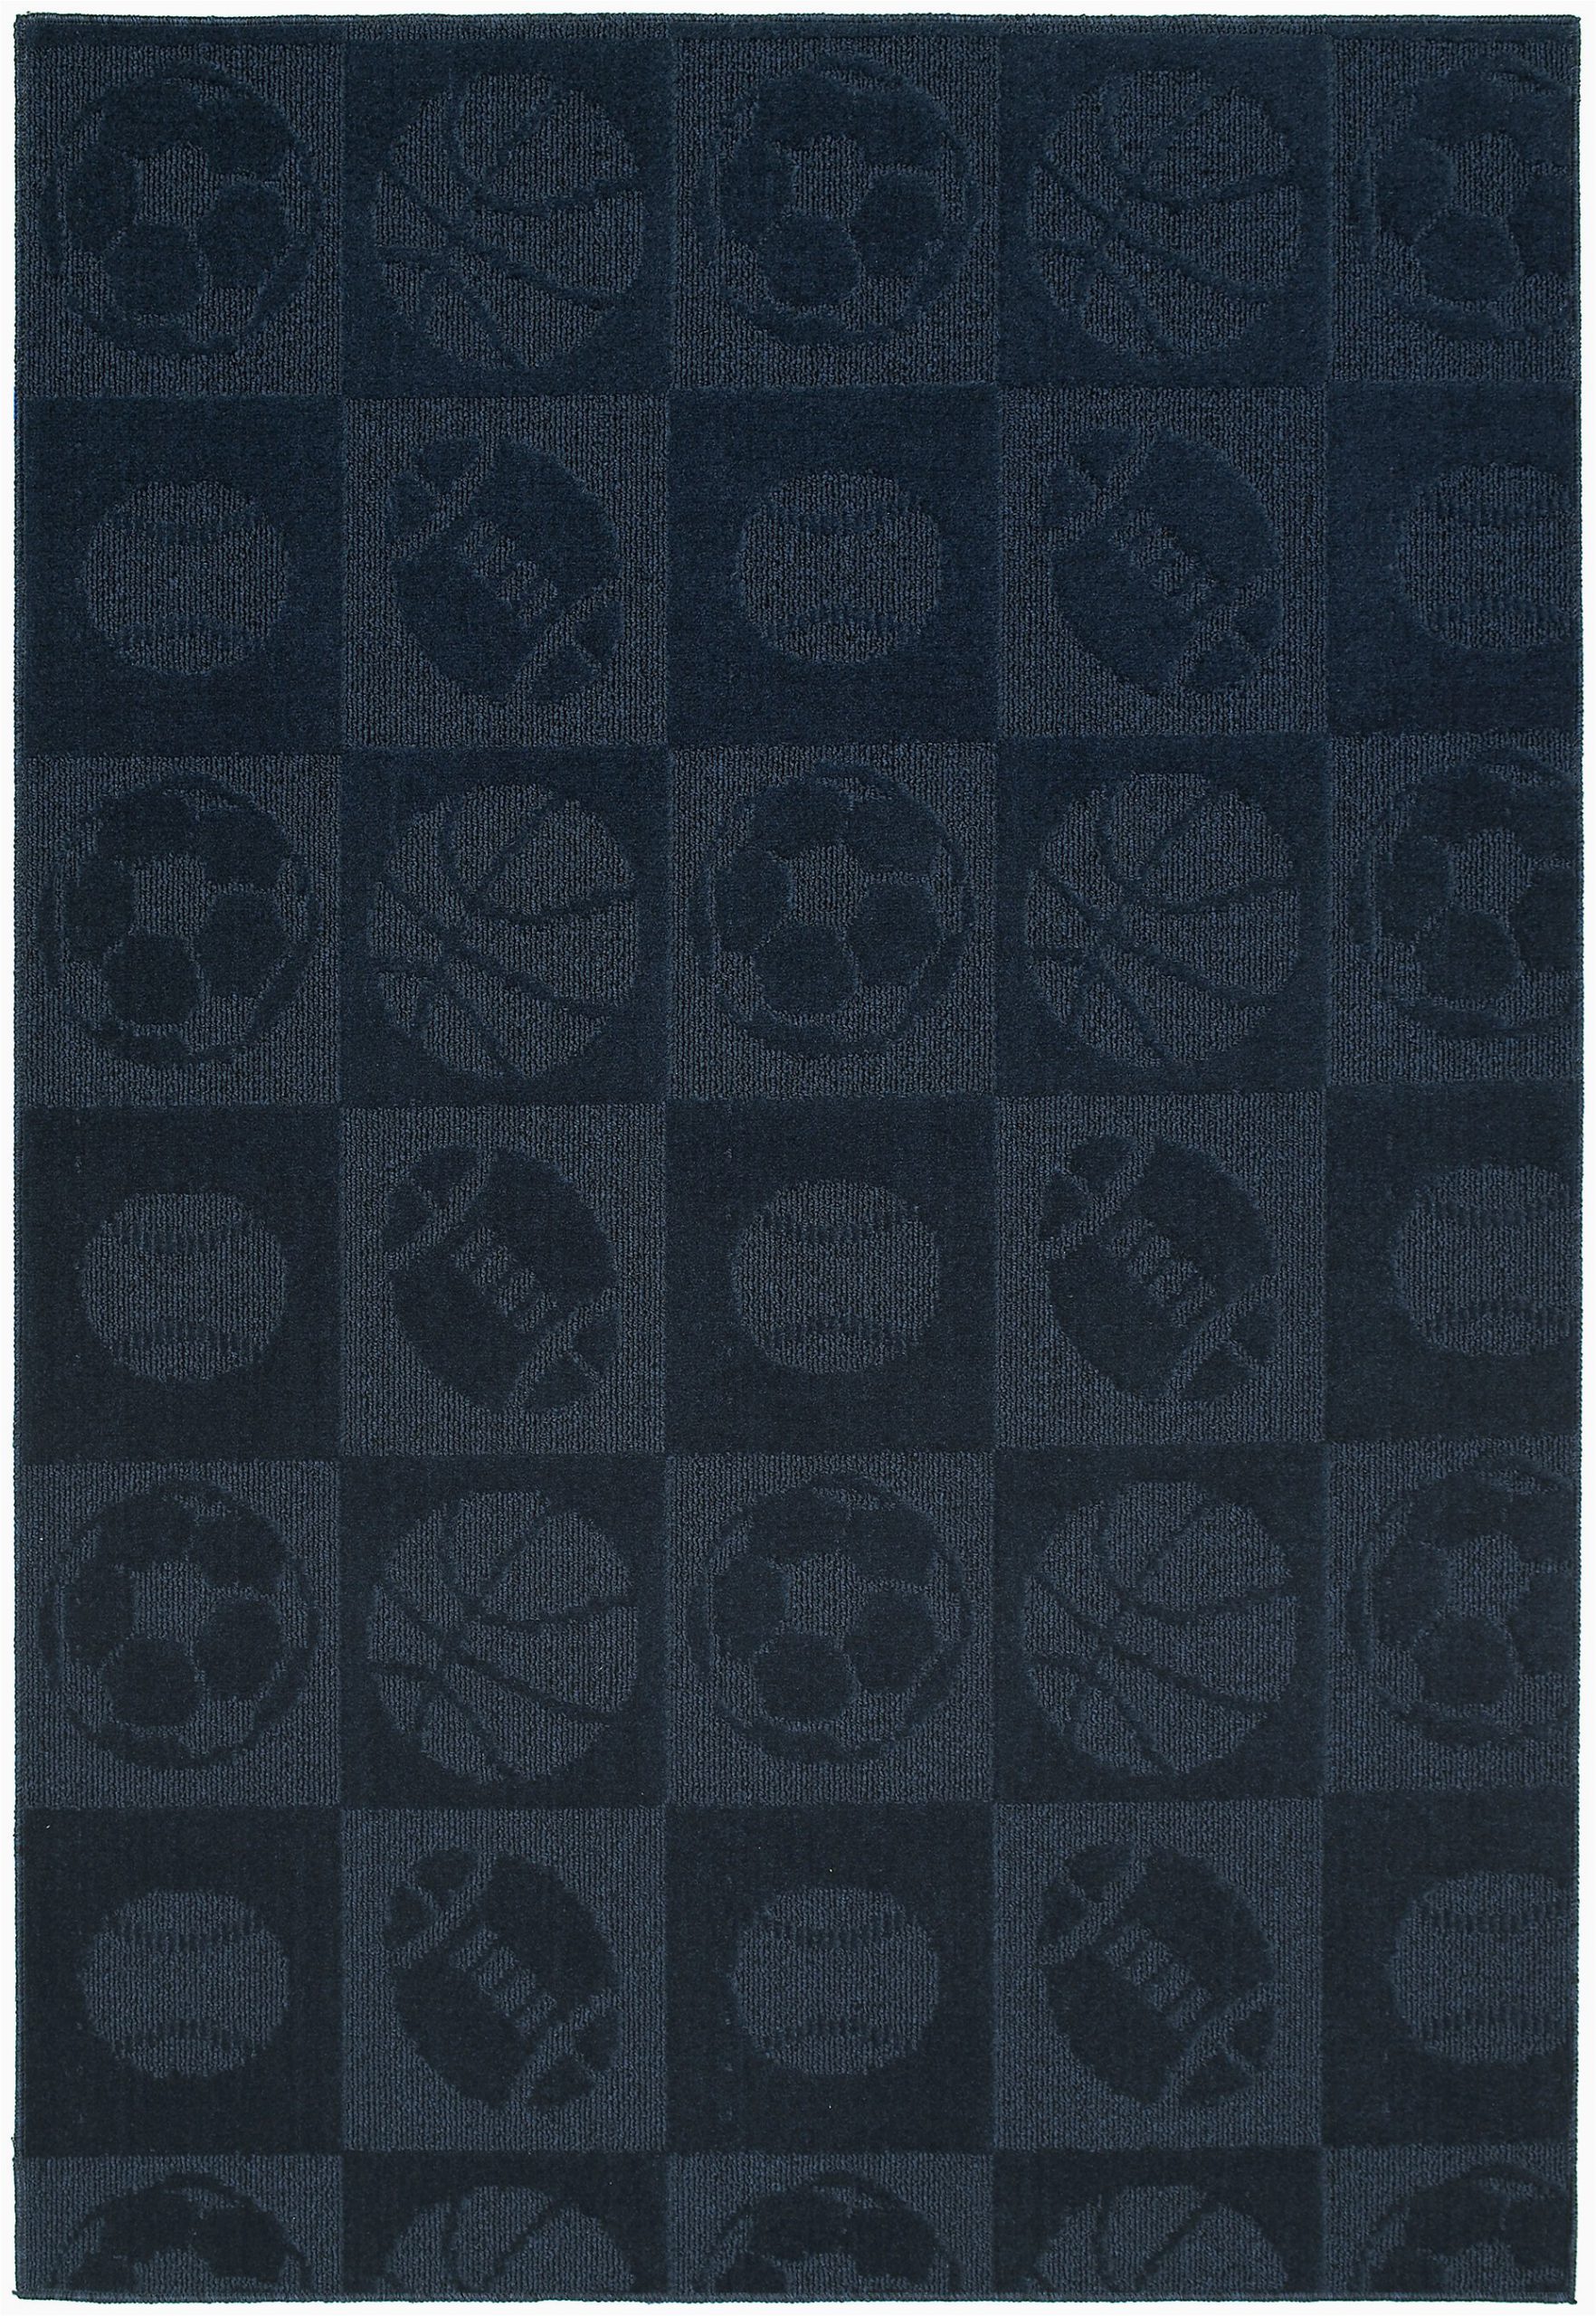 New York Yankees area Rug 5 X 8 Sports area Rugs You Ll Love In 2020